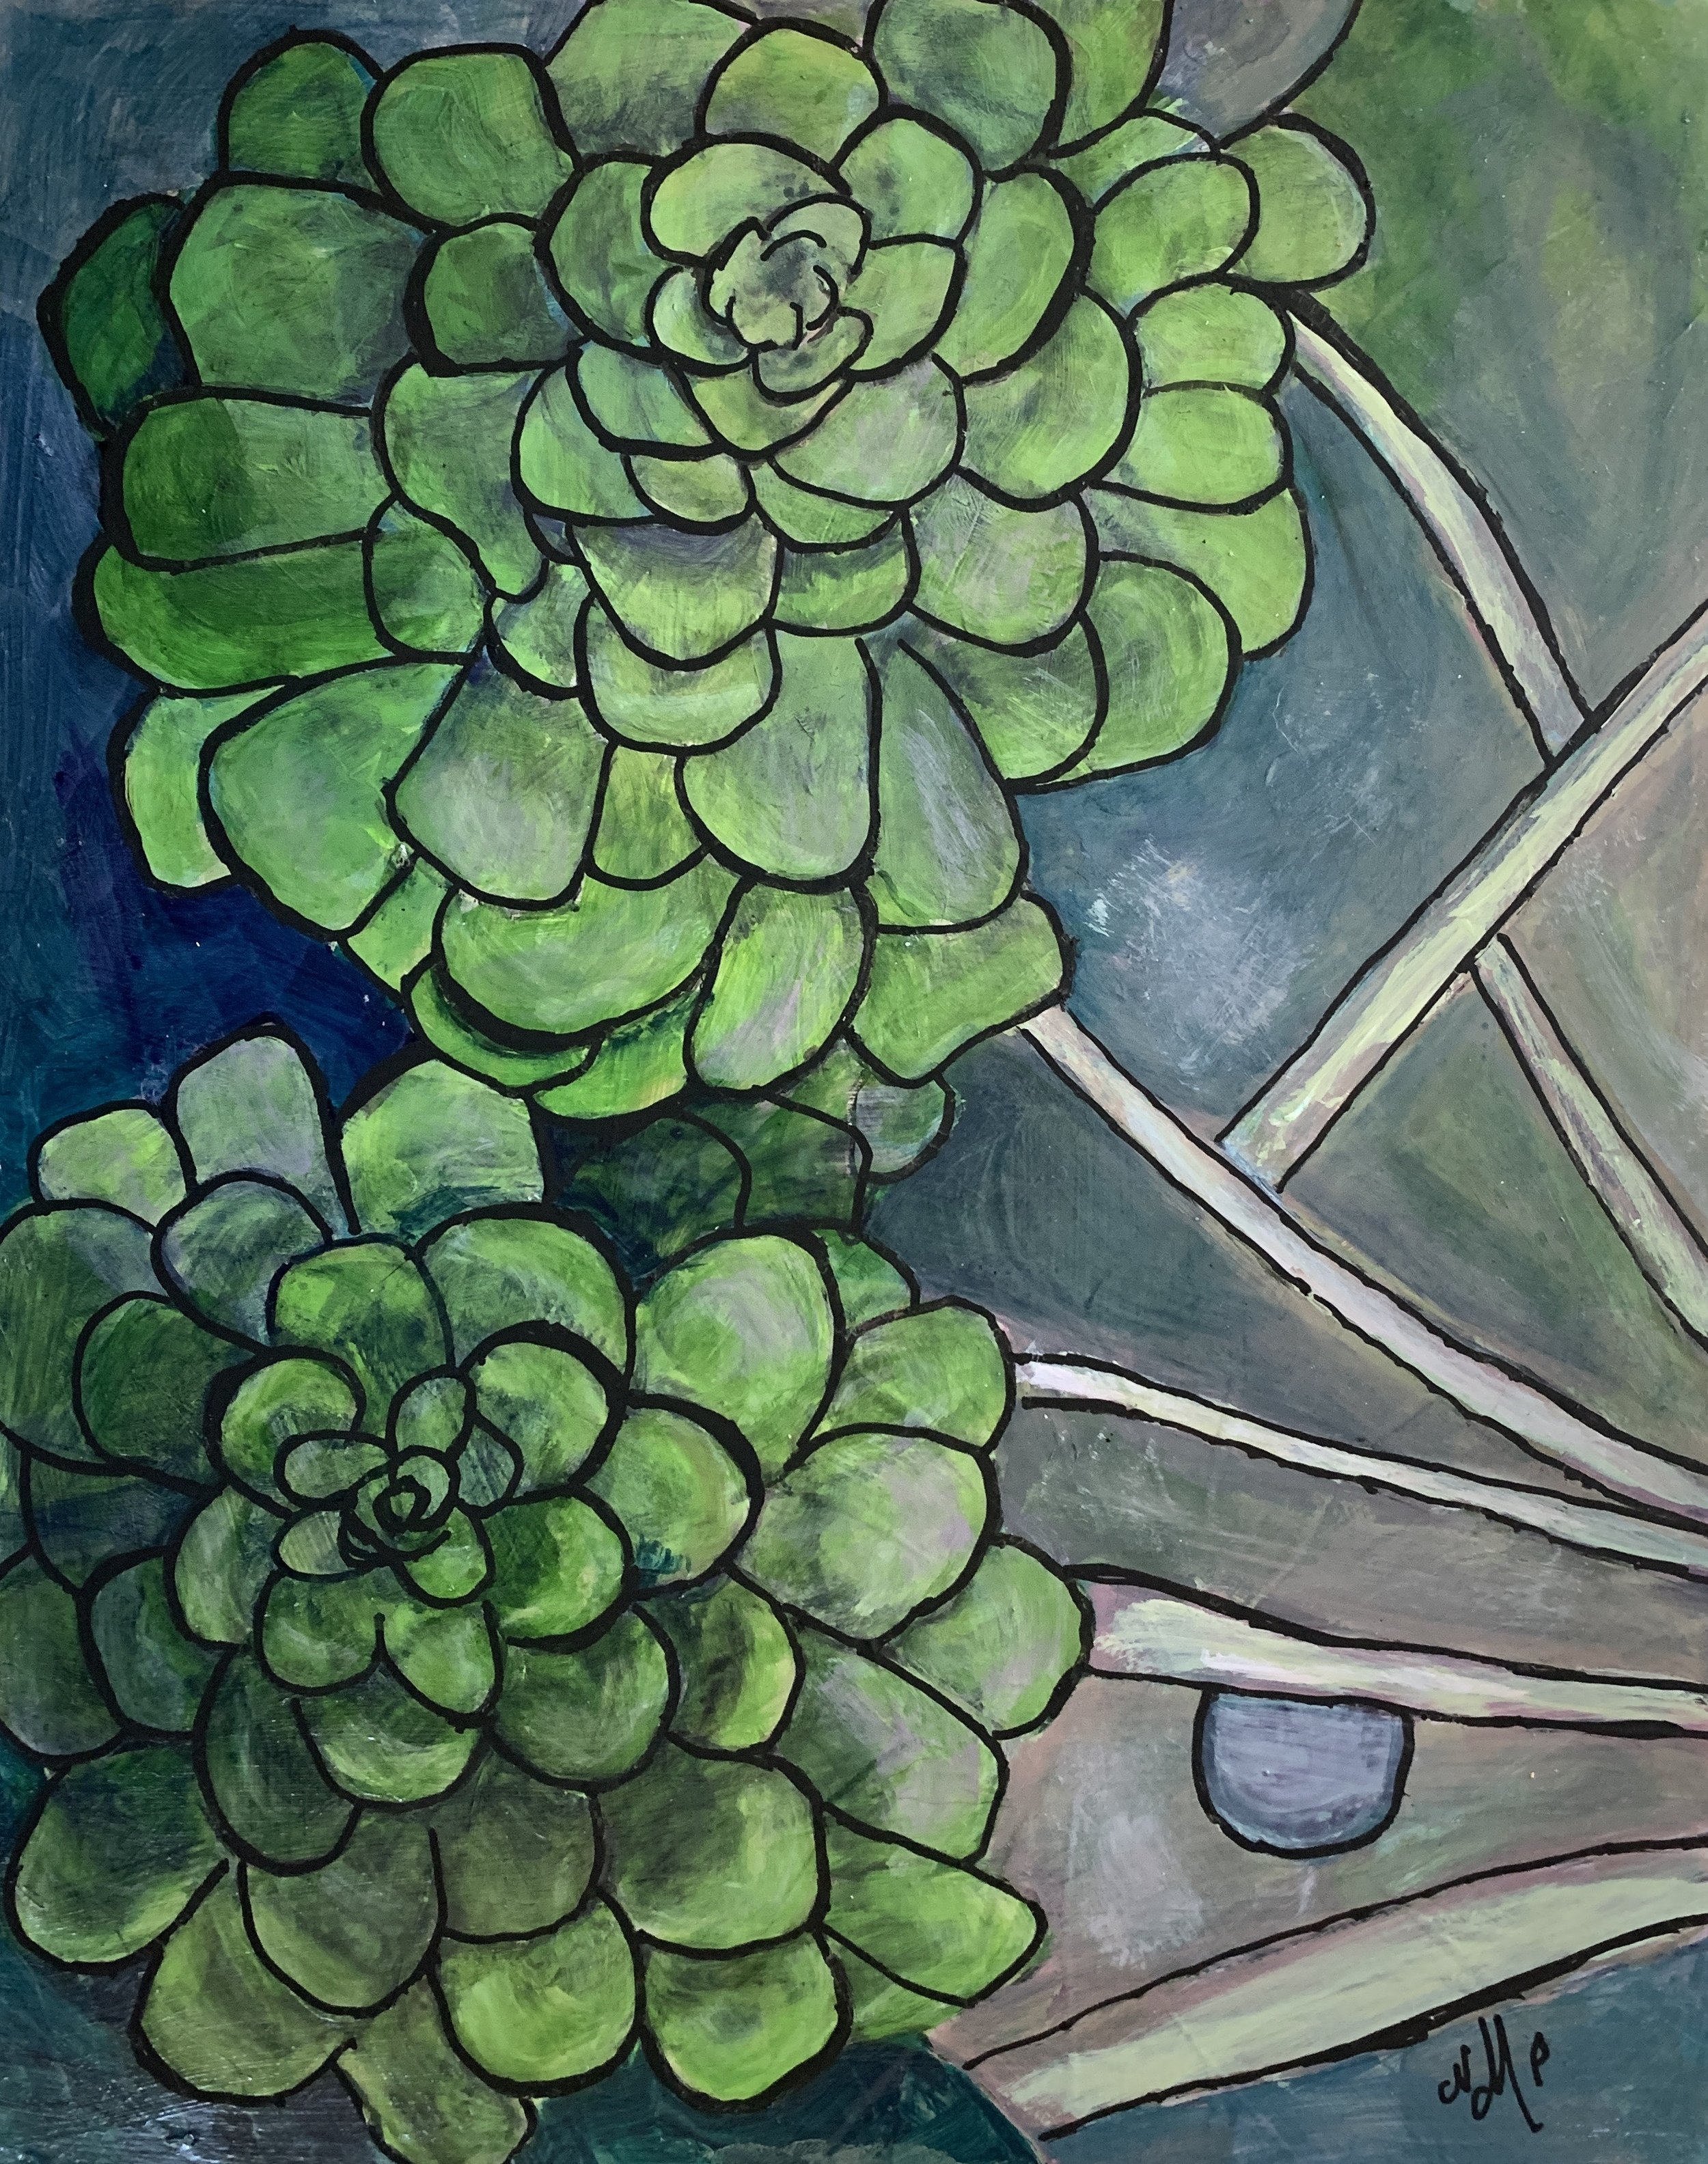 SUCCULENT ABSTRACTED     ACRYLIC ON PANEL  8”X10”     $220.00  +tax